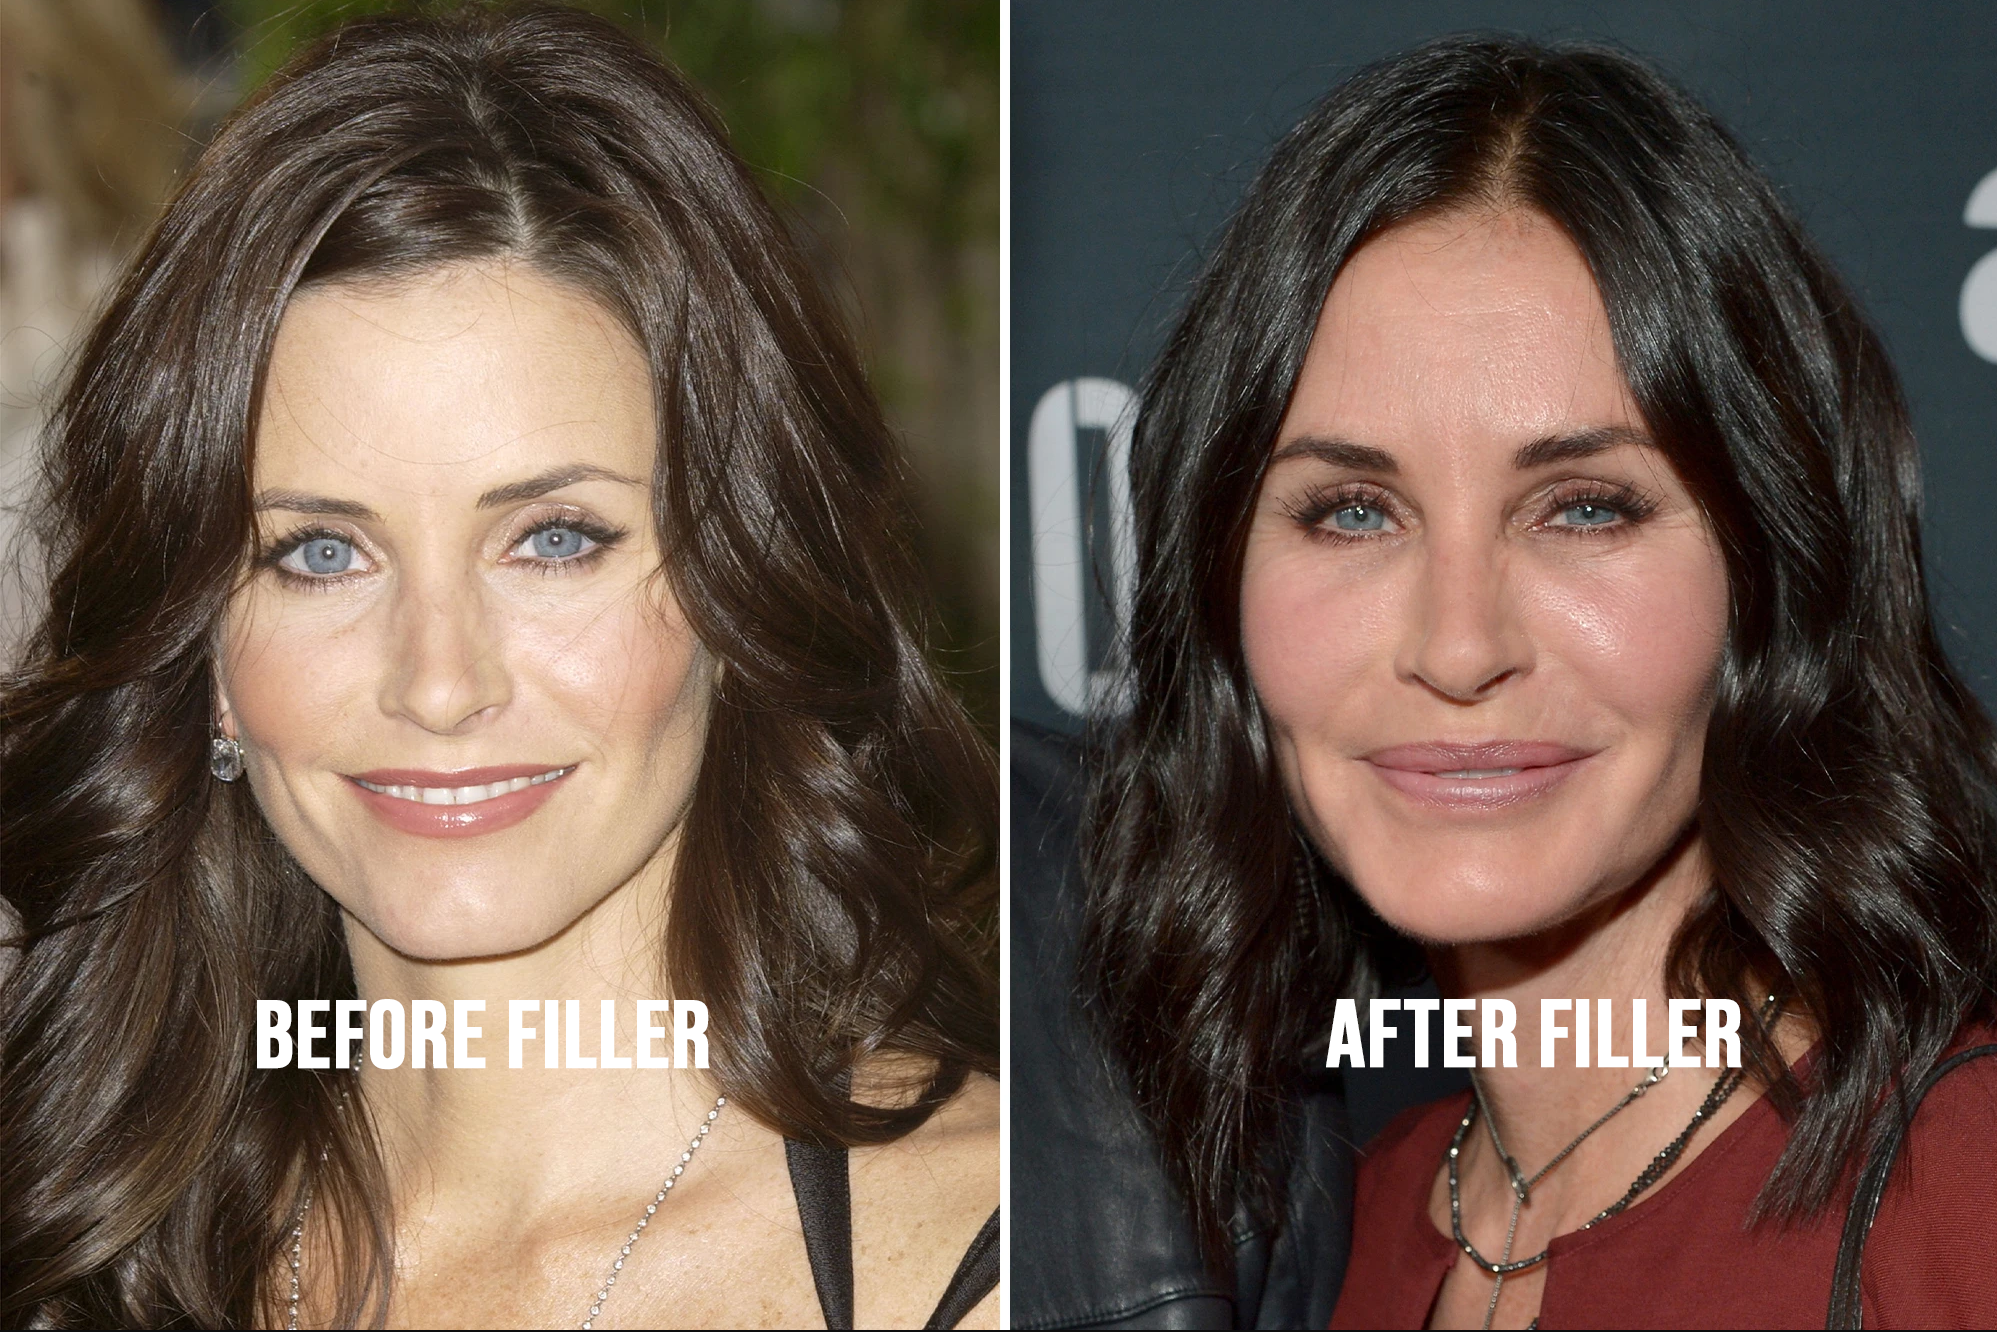 courtney cox before and after filler